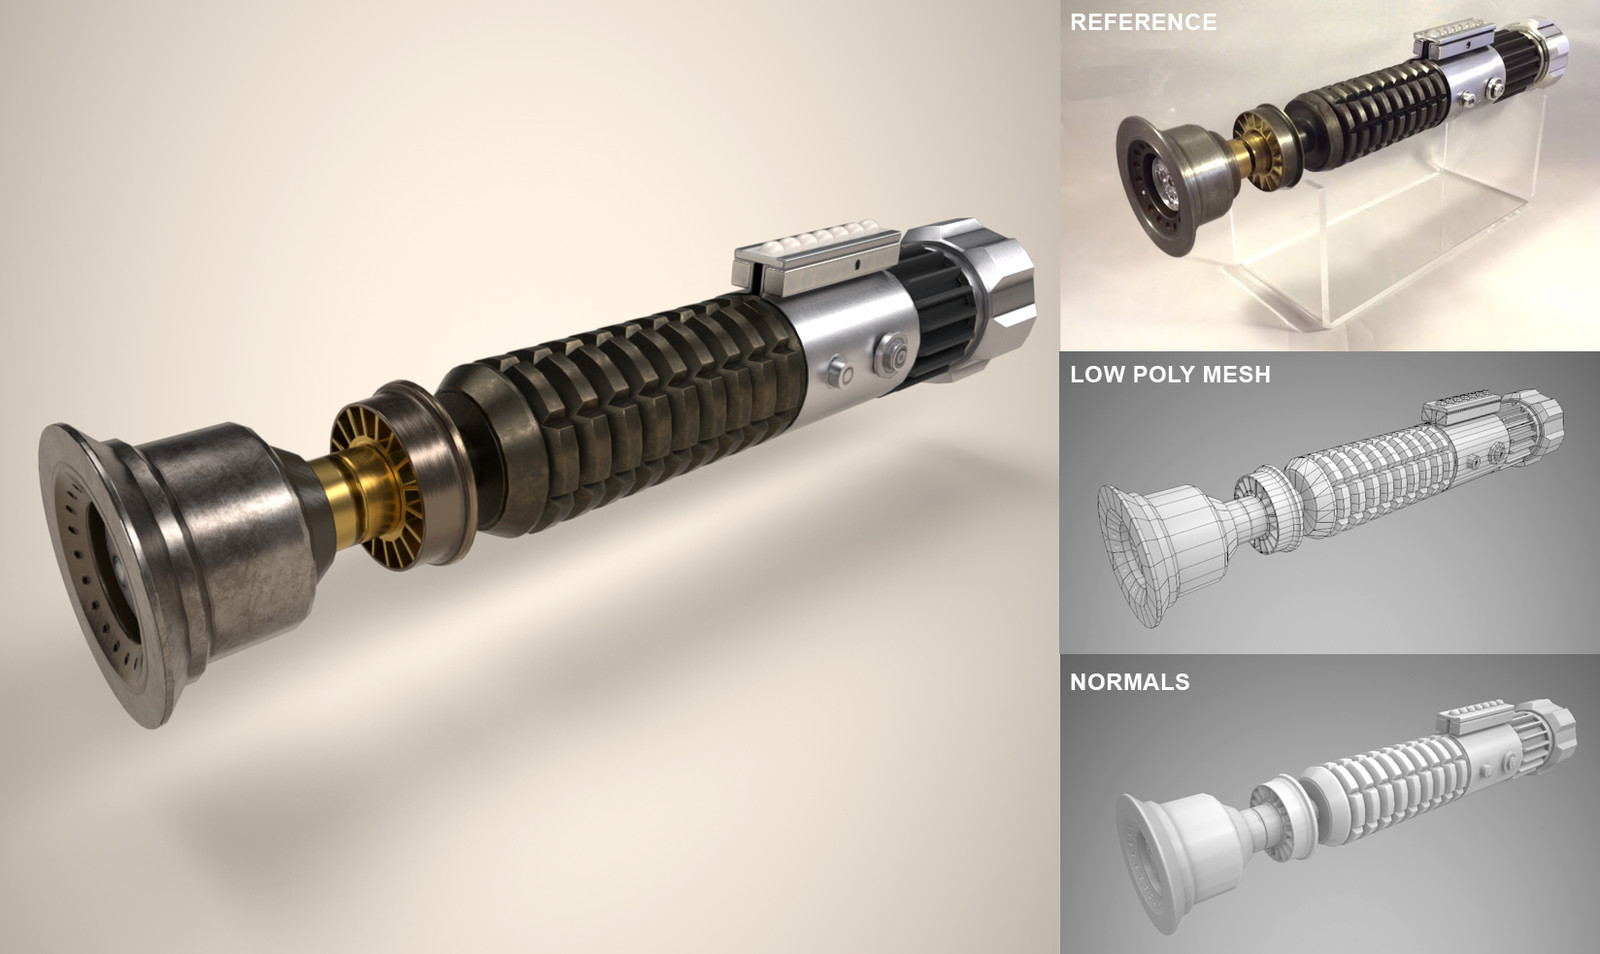 Substance Painter Render on the left. Photograph of the movie lightsaber prop on the top right for reference.